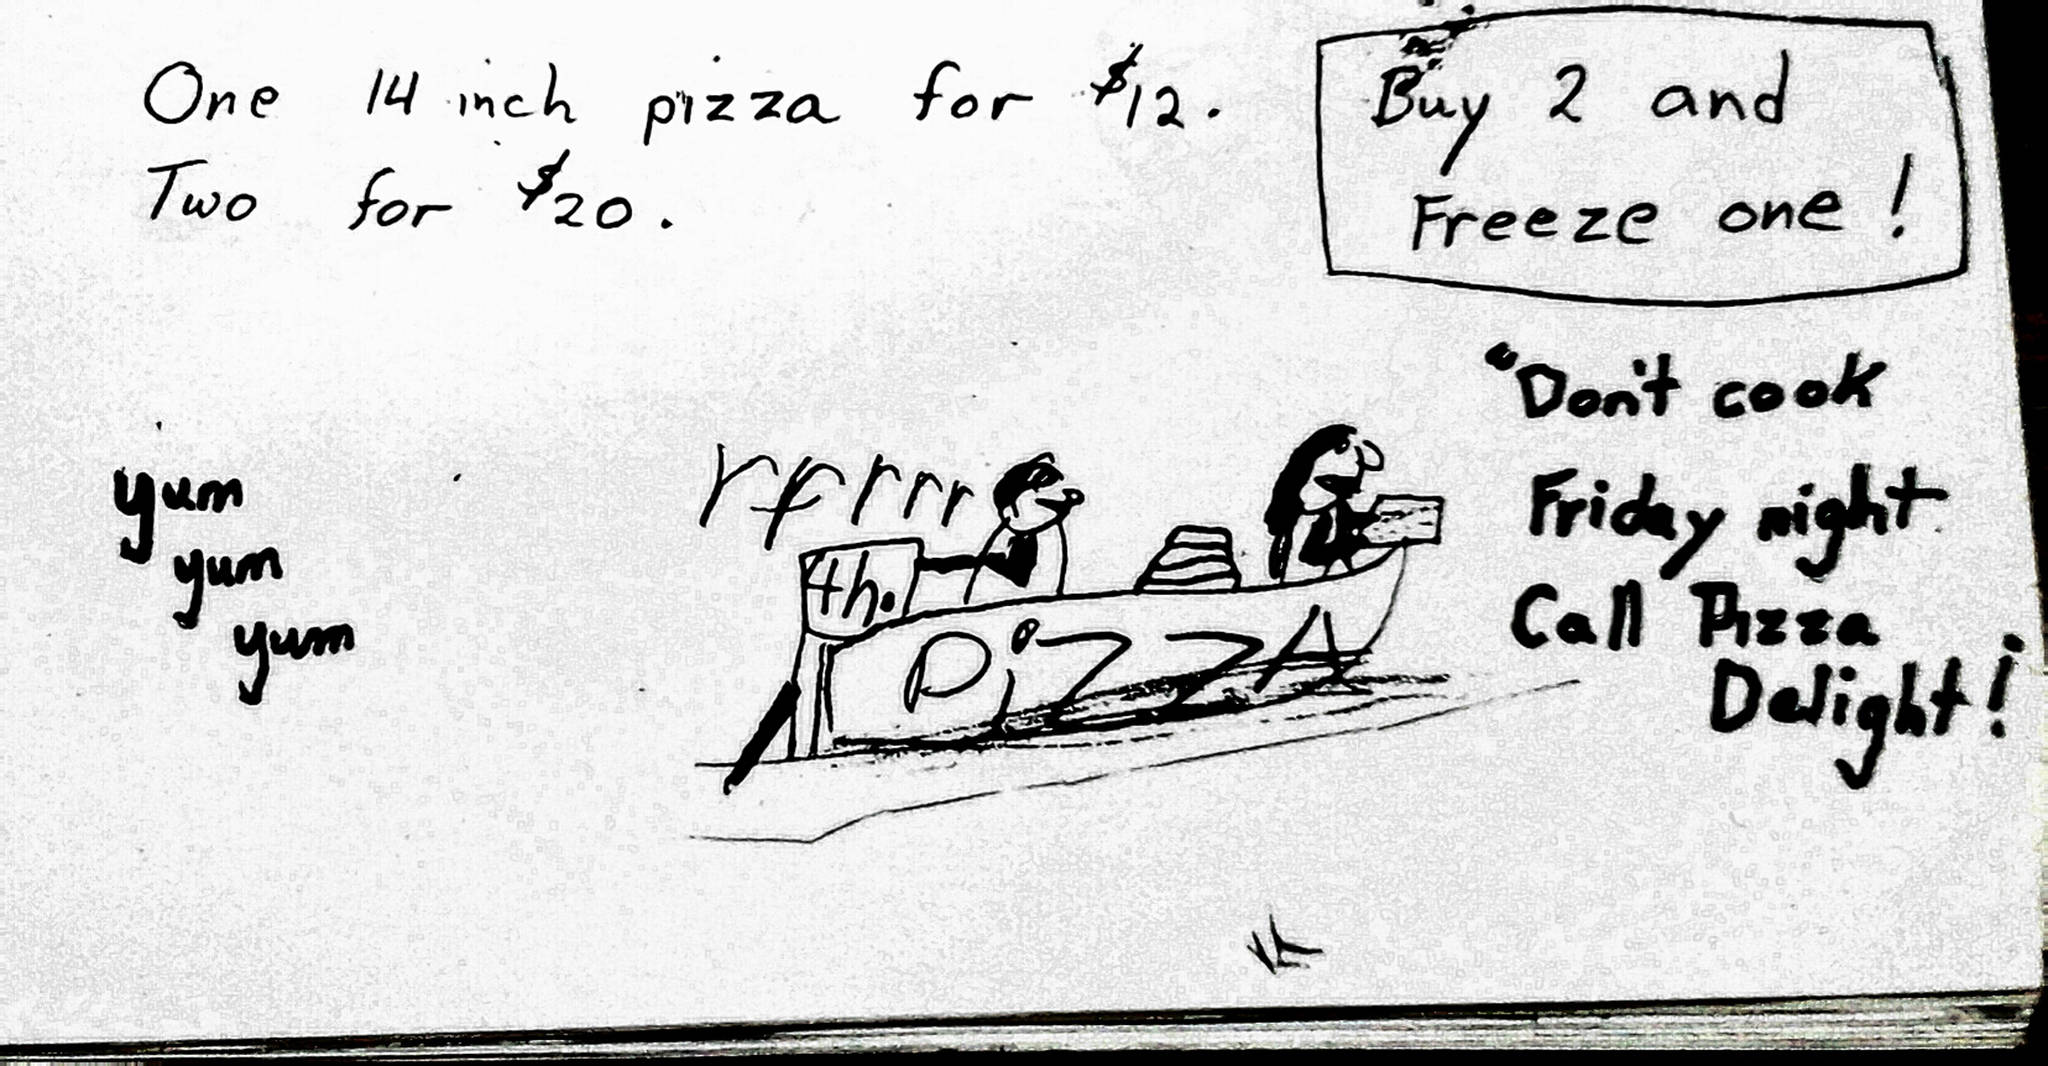 A sketch from one of Tara’s schoolmates about delivering pizza to bush dwellers with a craving. Photo by Tara Neilson.